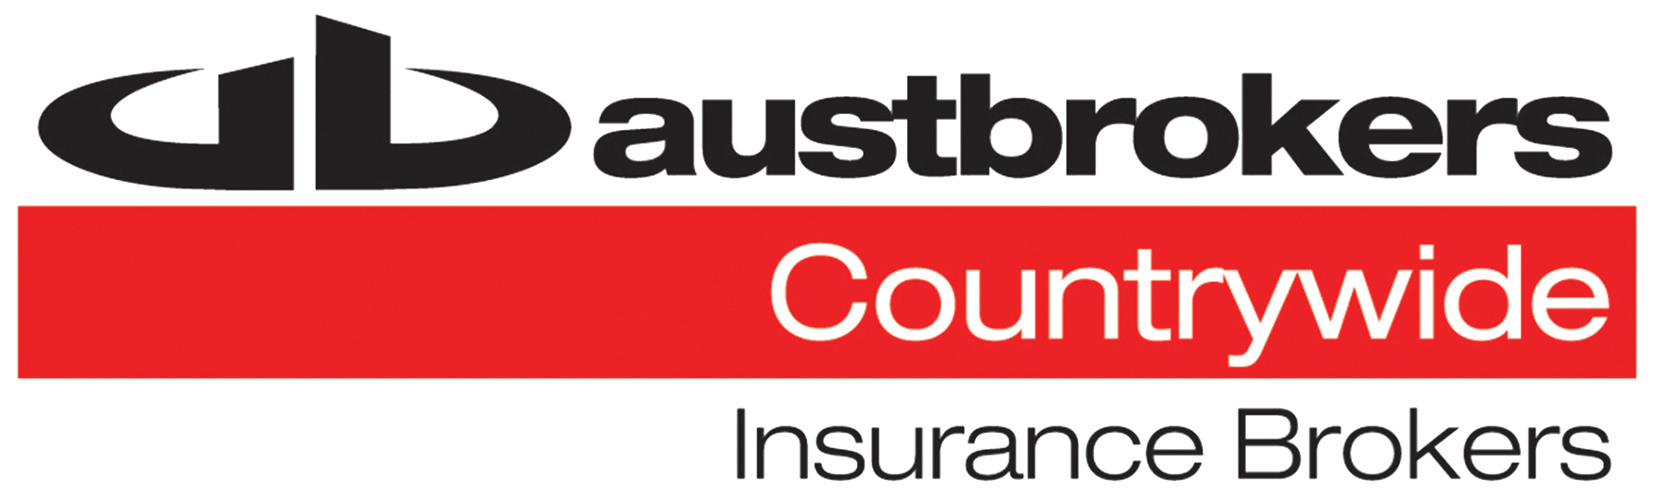 Austbrokers Countrywide